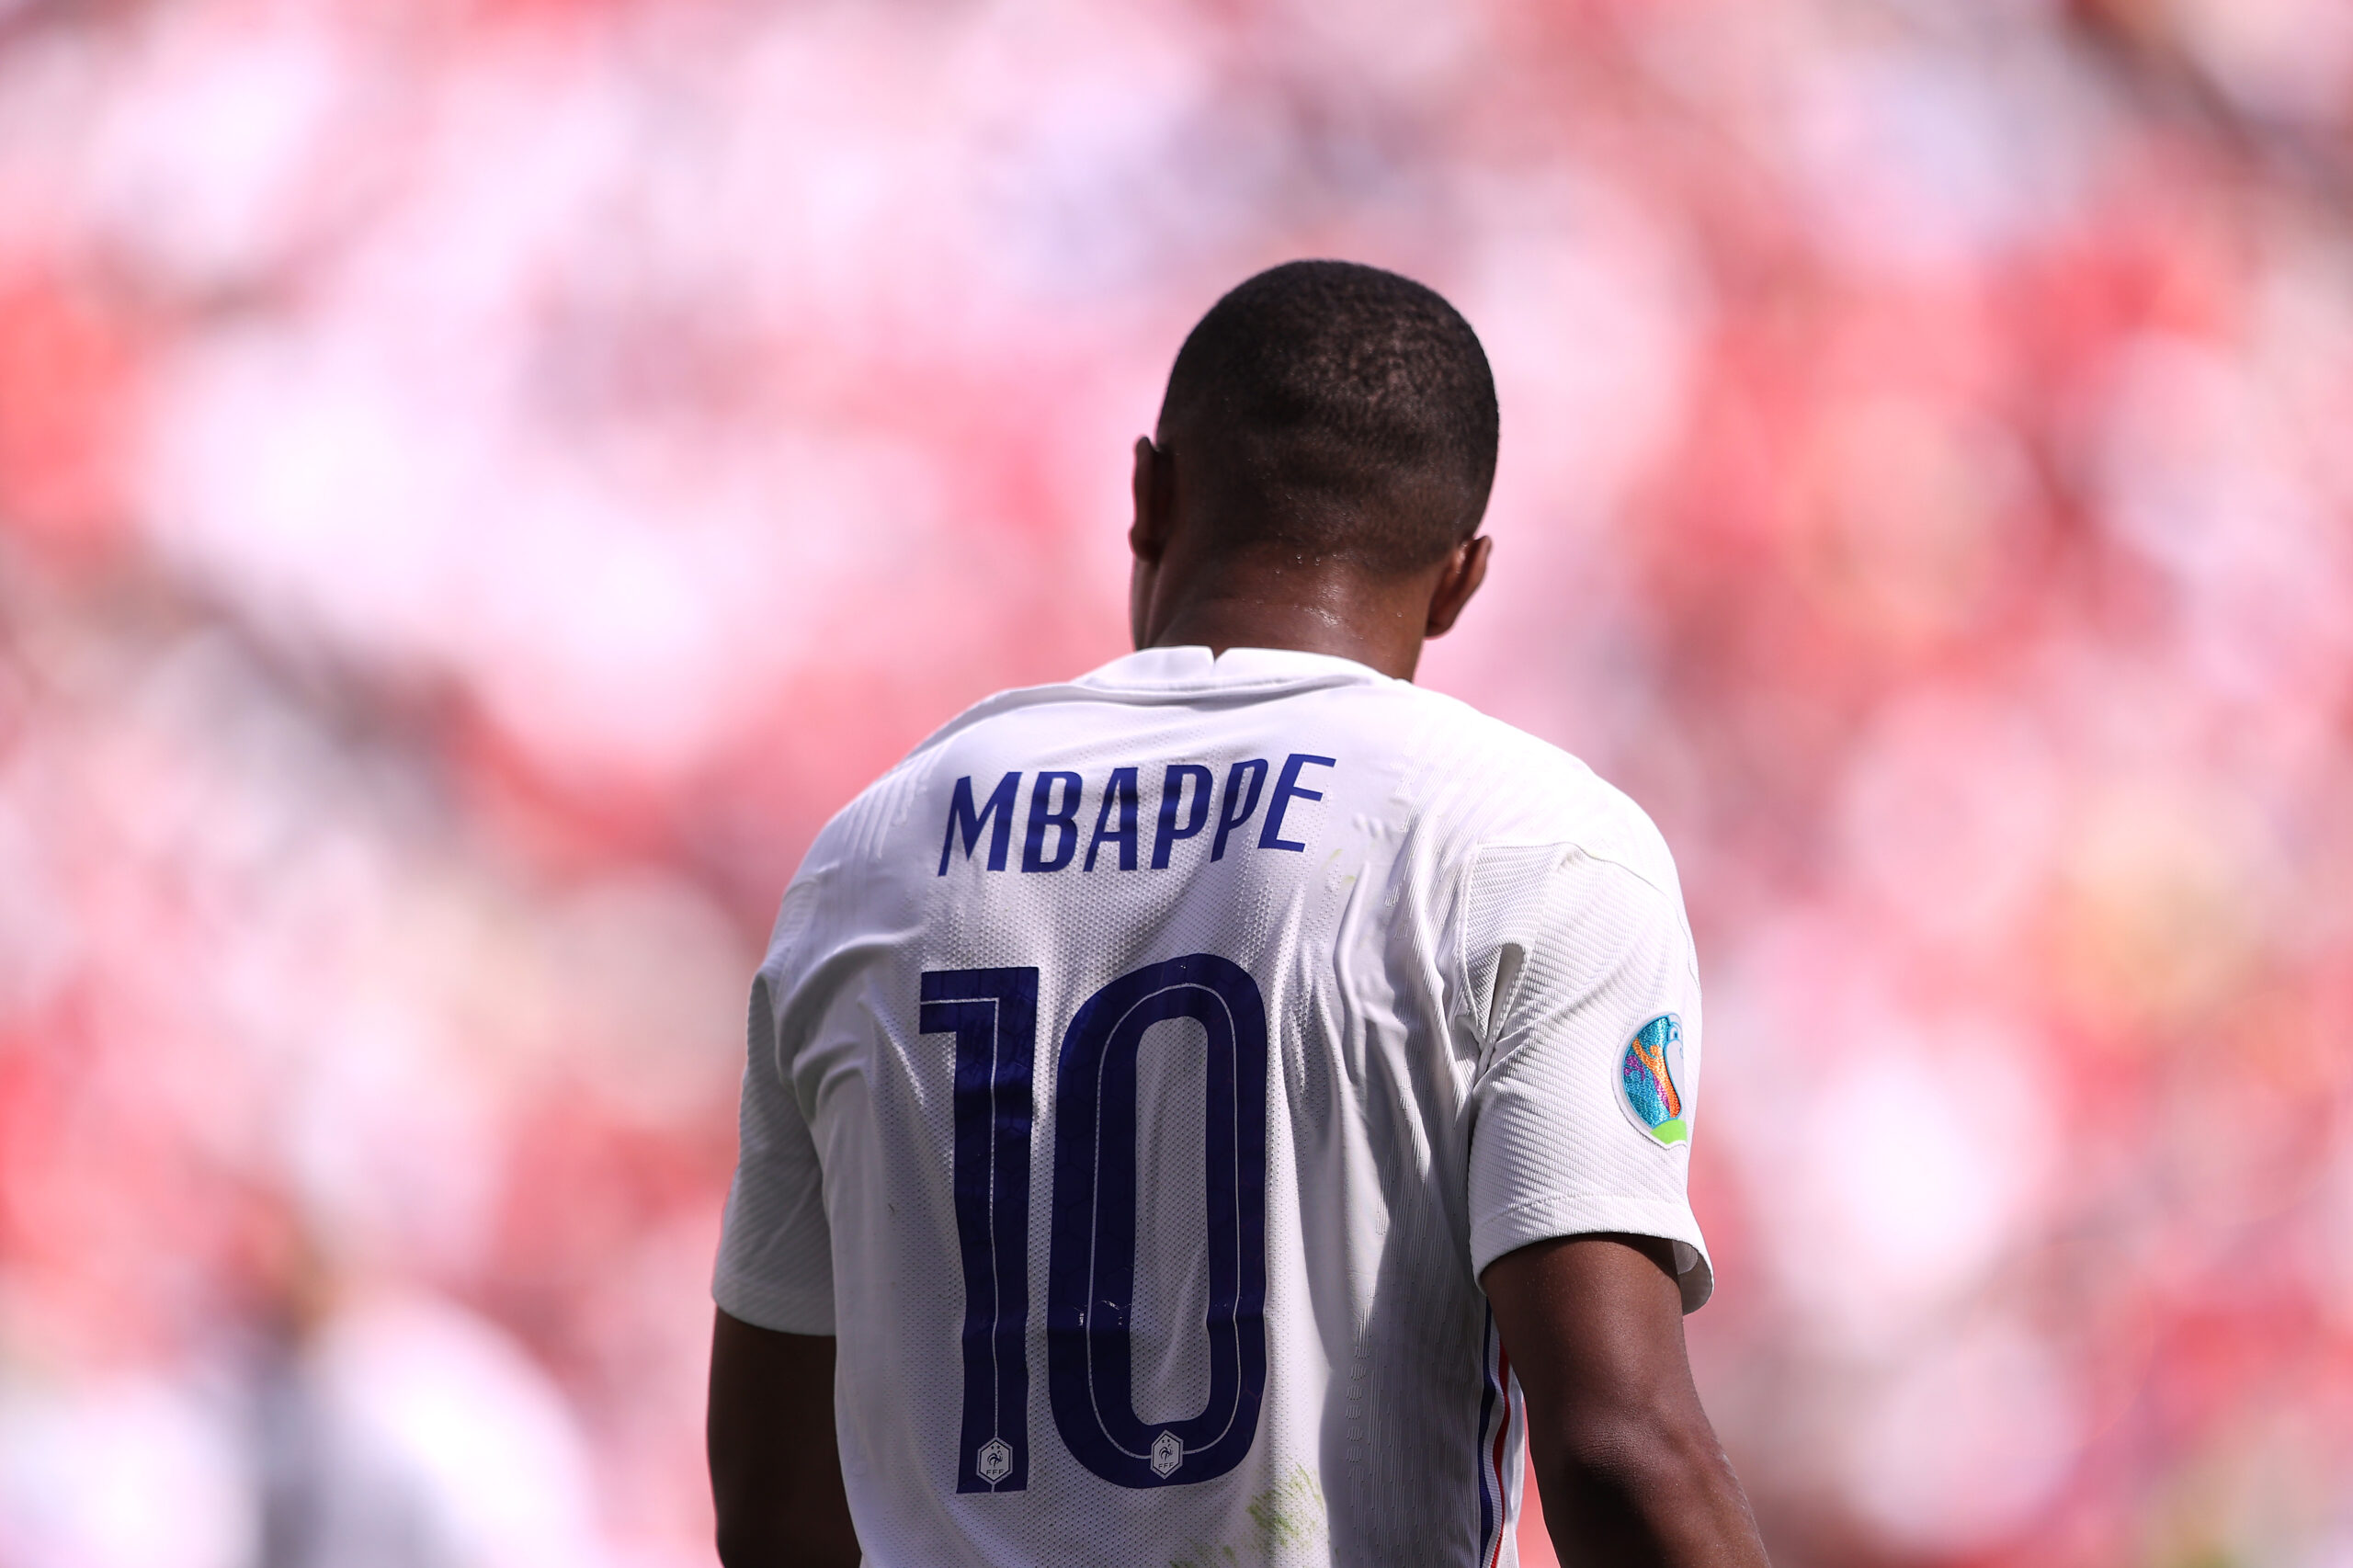 Despite the emotions at play, Mbappé will be eager to score against Milan, the club he idolized as a youngster and inflict perhaps a third winless UCL game.